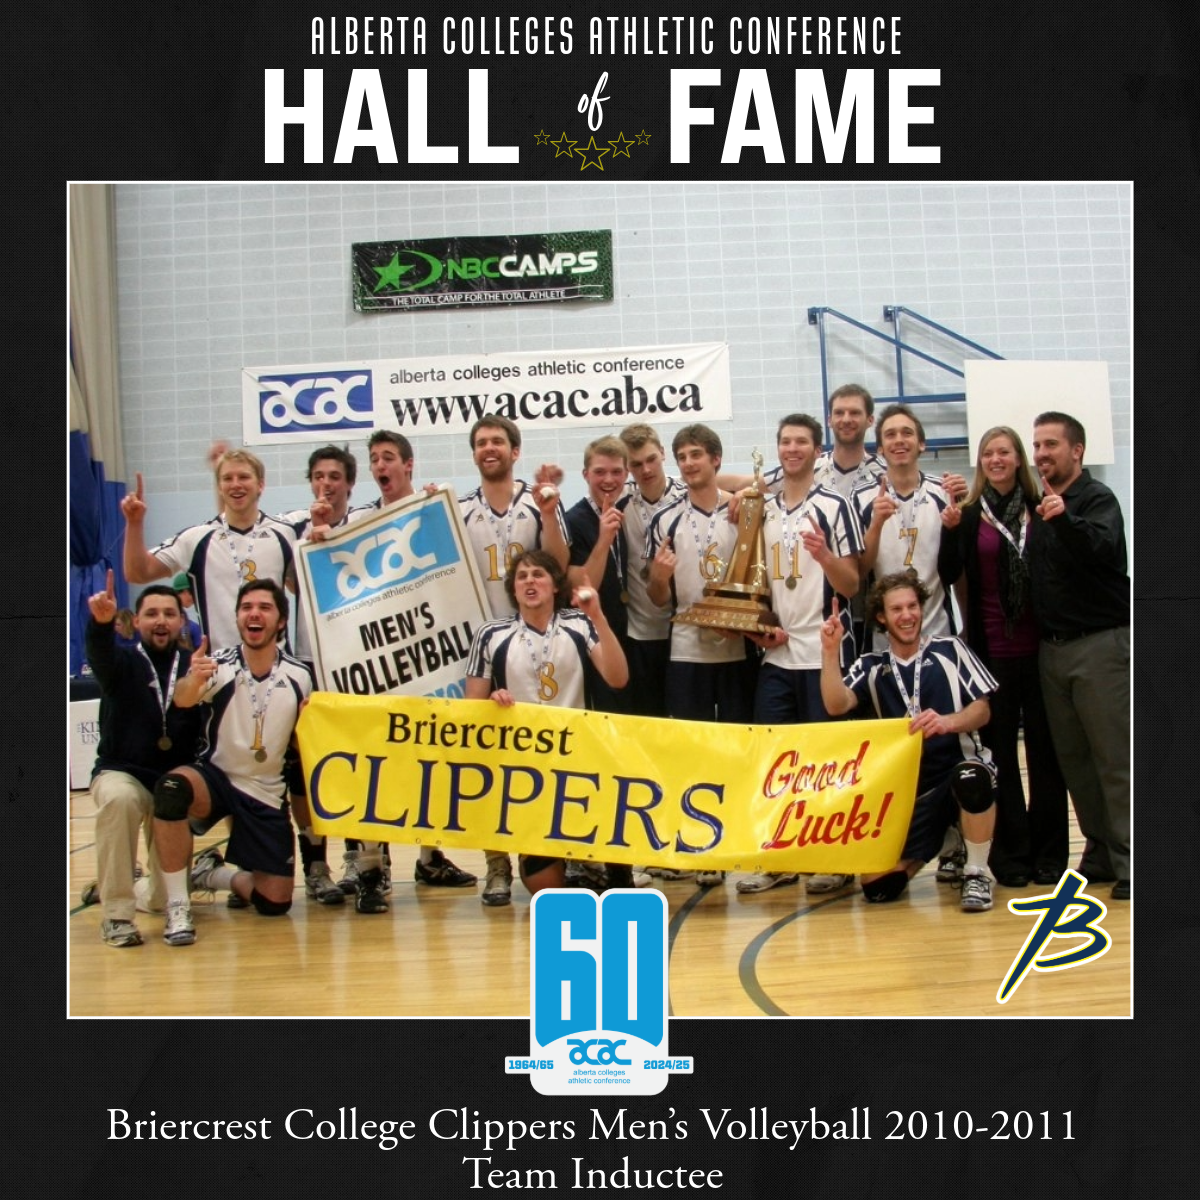 ACAC Hall of Fame Team Inductee: Briercrest College Clippers Men's Volleyball